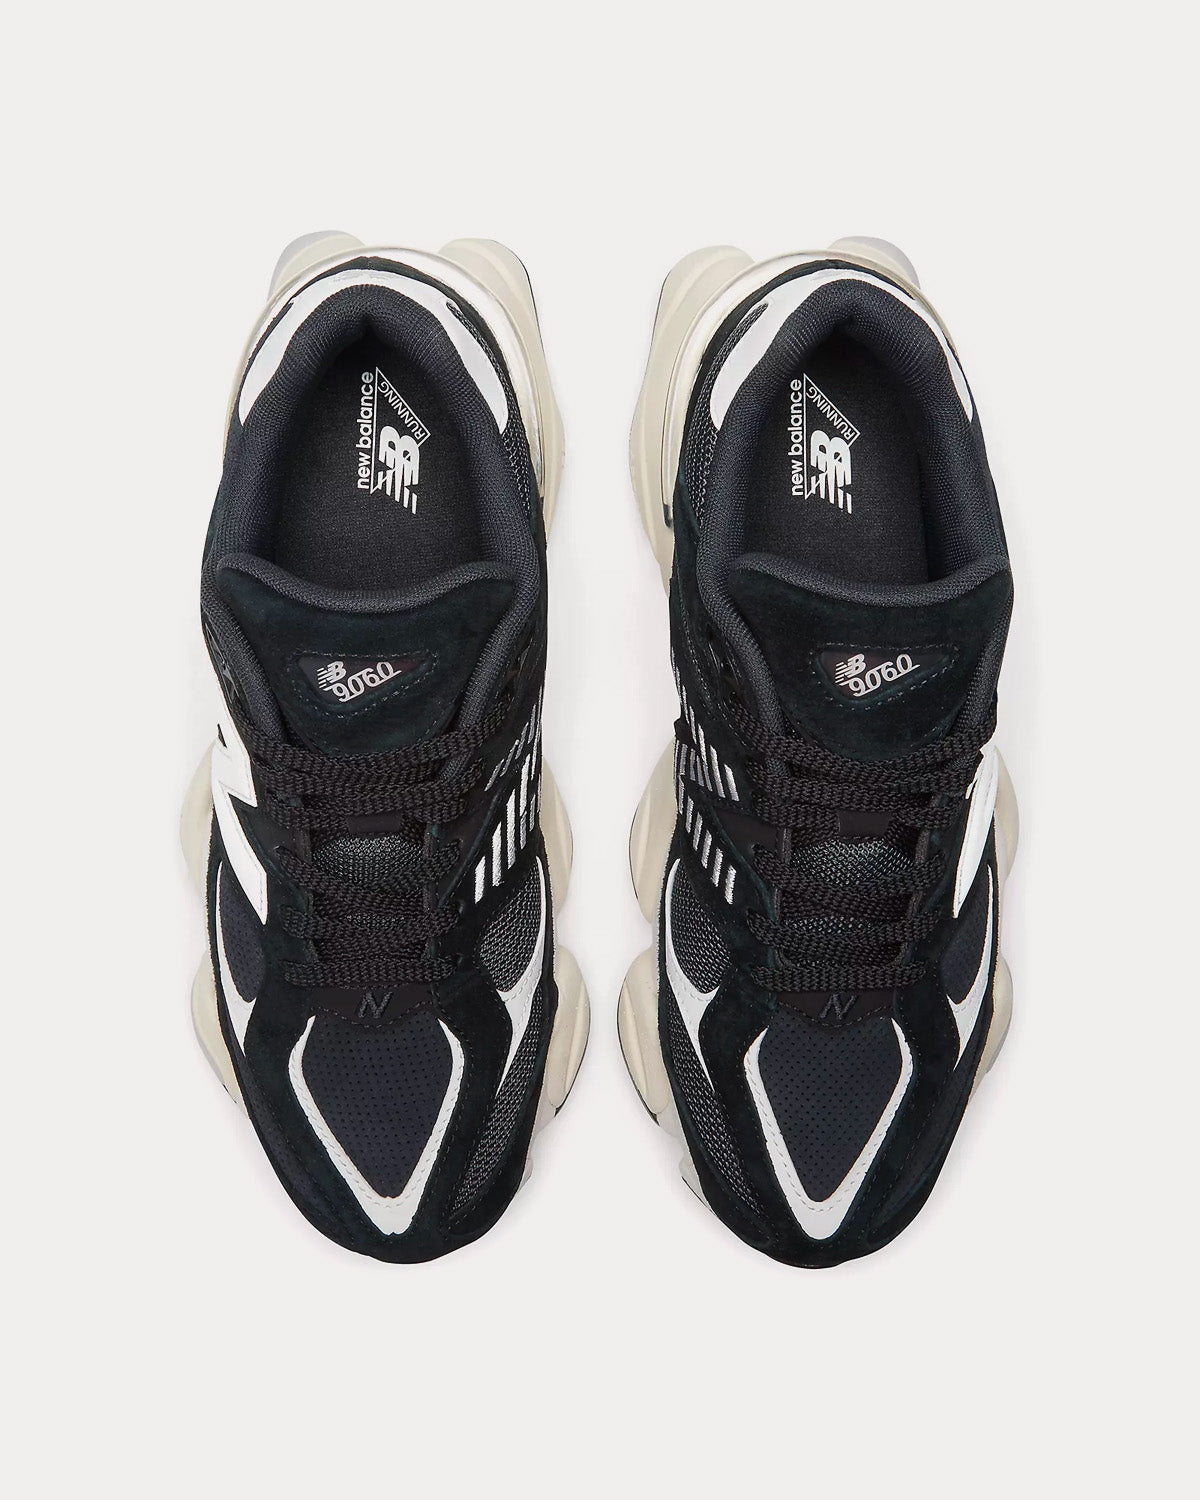 New Balance 9060 Black / White Low Top Sneakers - Sneak in Peace